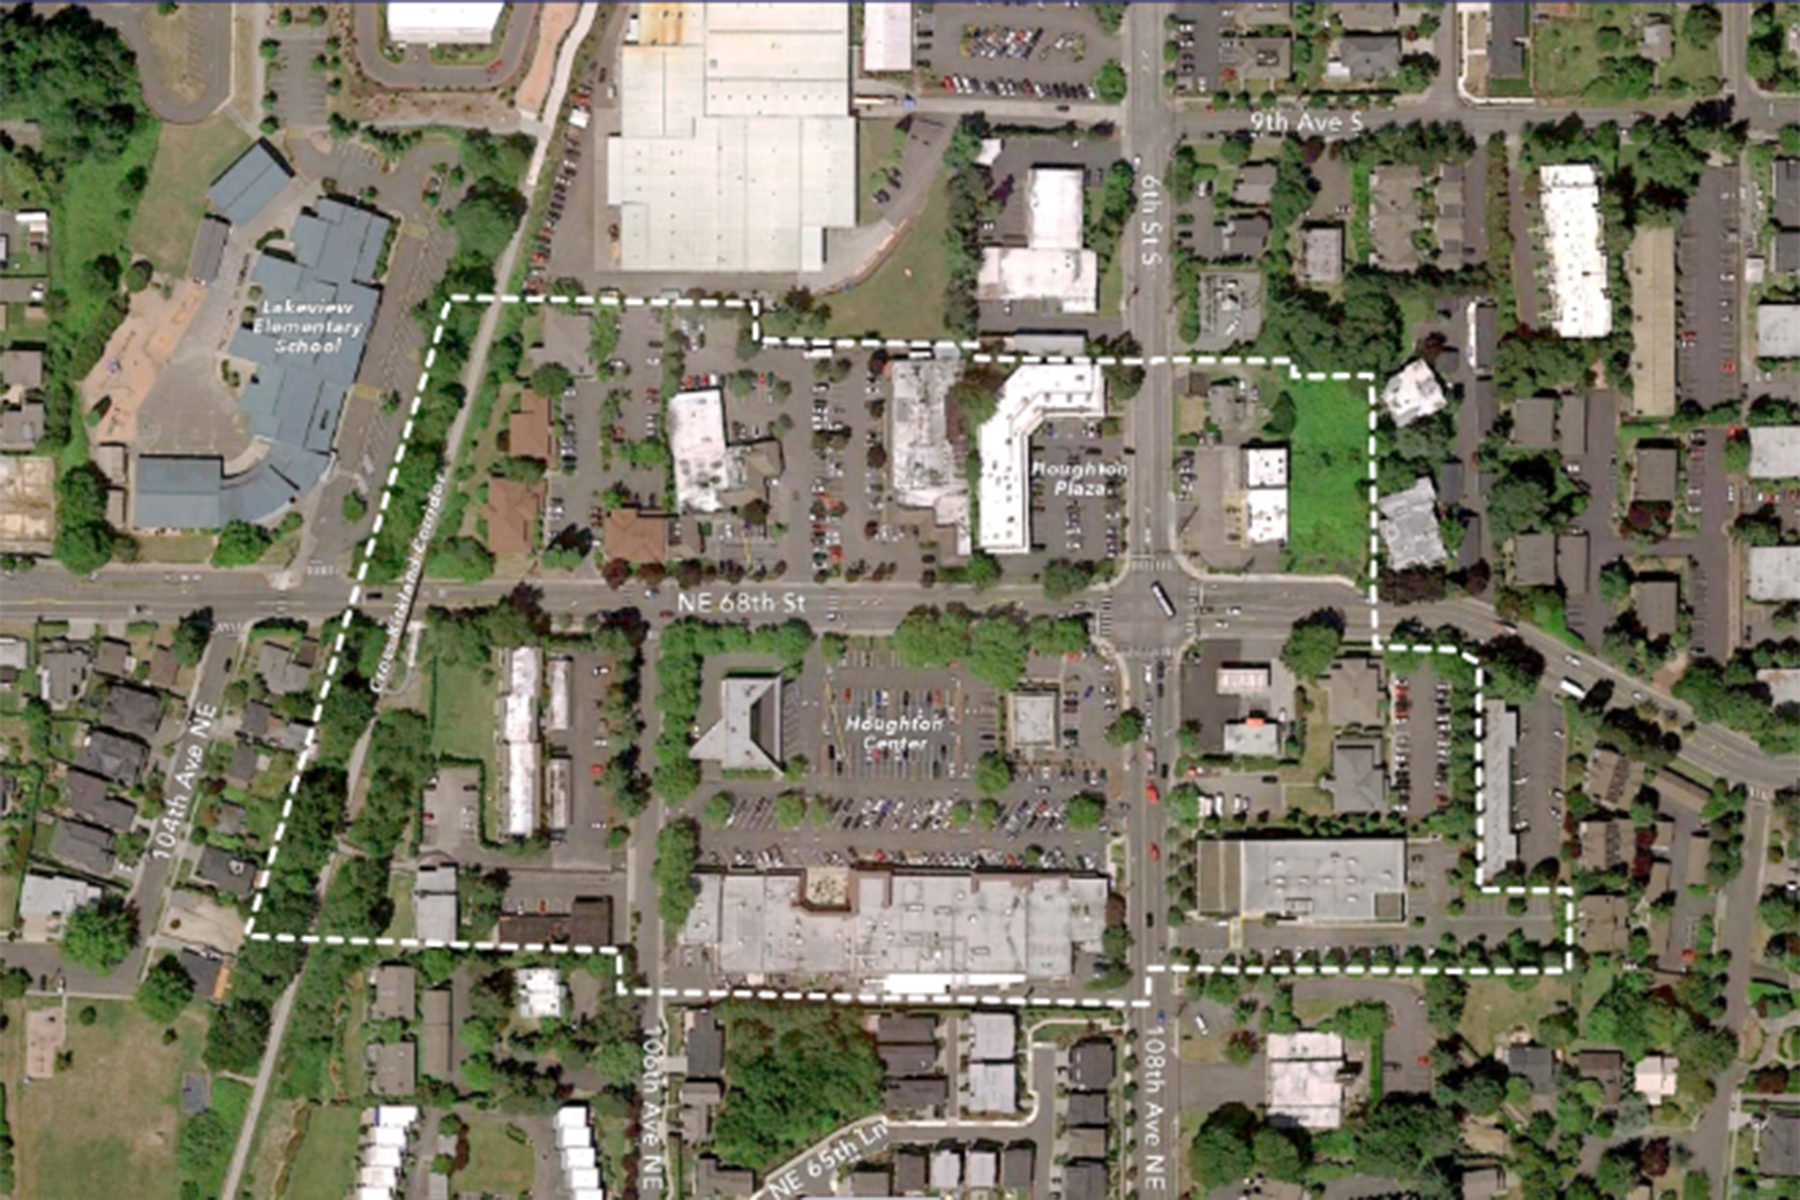 A map provided by the City of Kirkland shows the Houghton Everest Neighborhood Center (inside the dashed white line), the area being examined by the city for possible land use code amendments. Submitted art